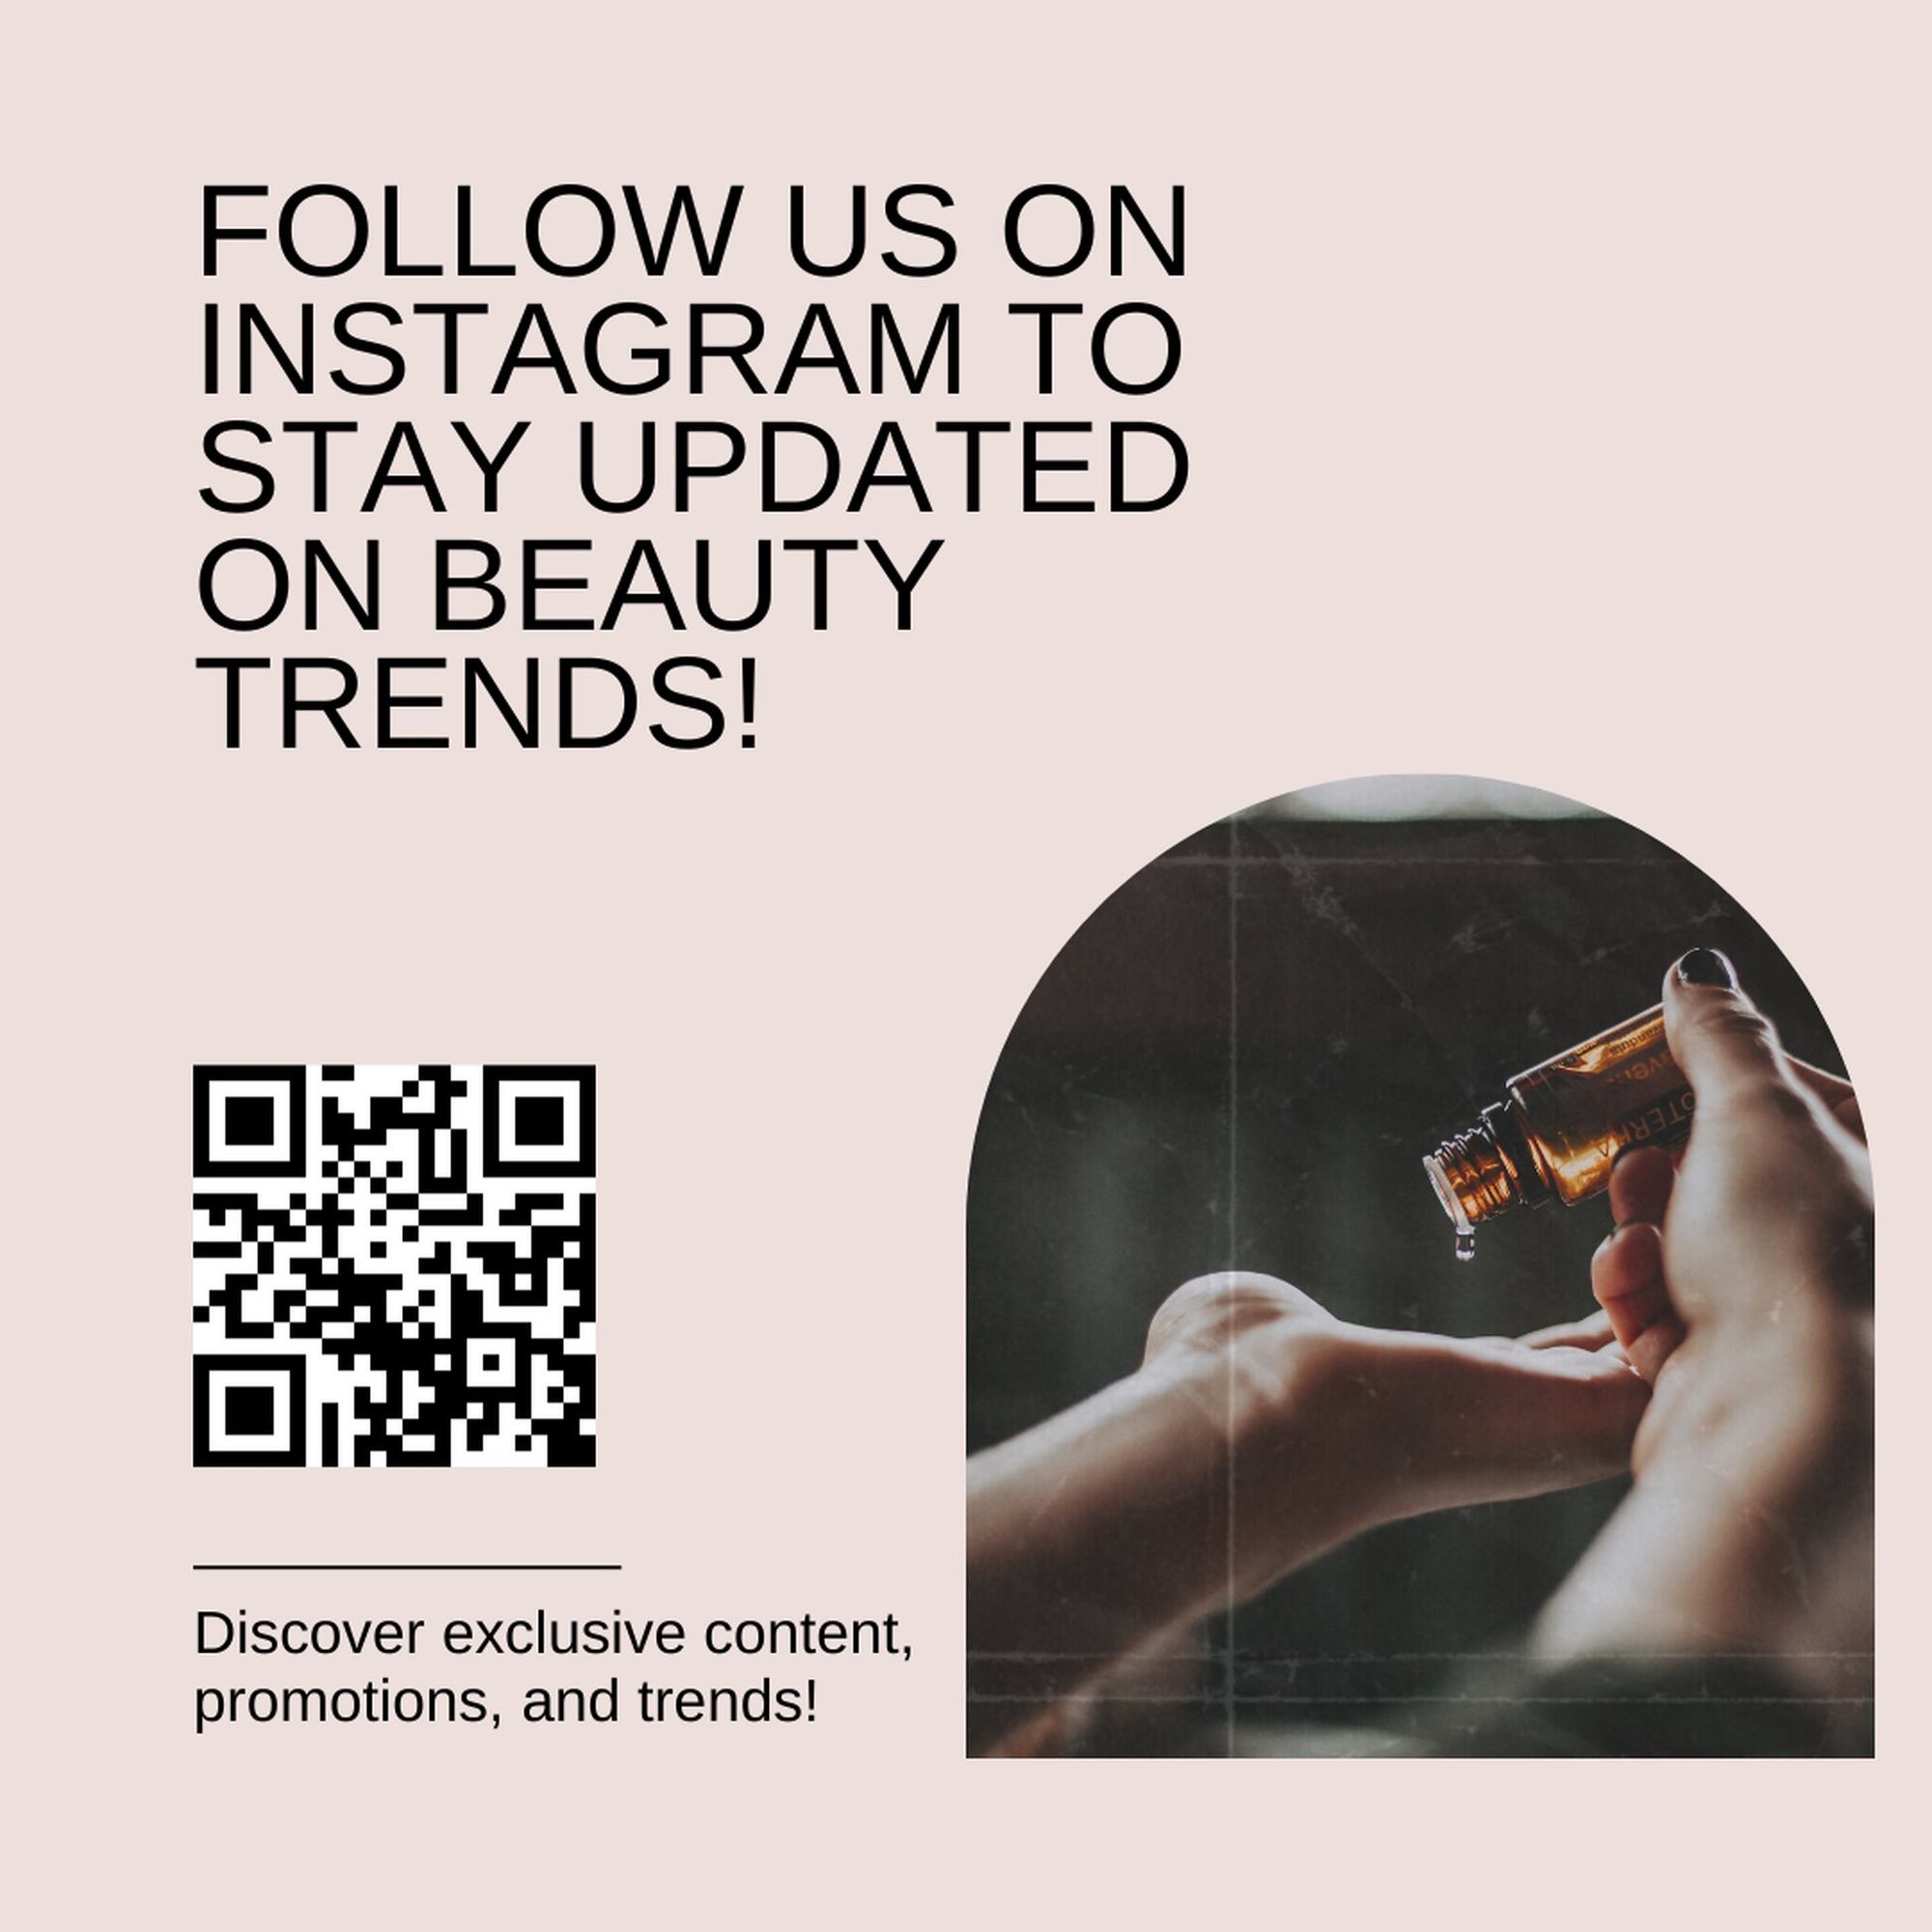 follow us on Instagram template for a beauty company with a QR code